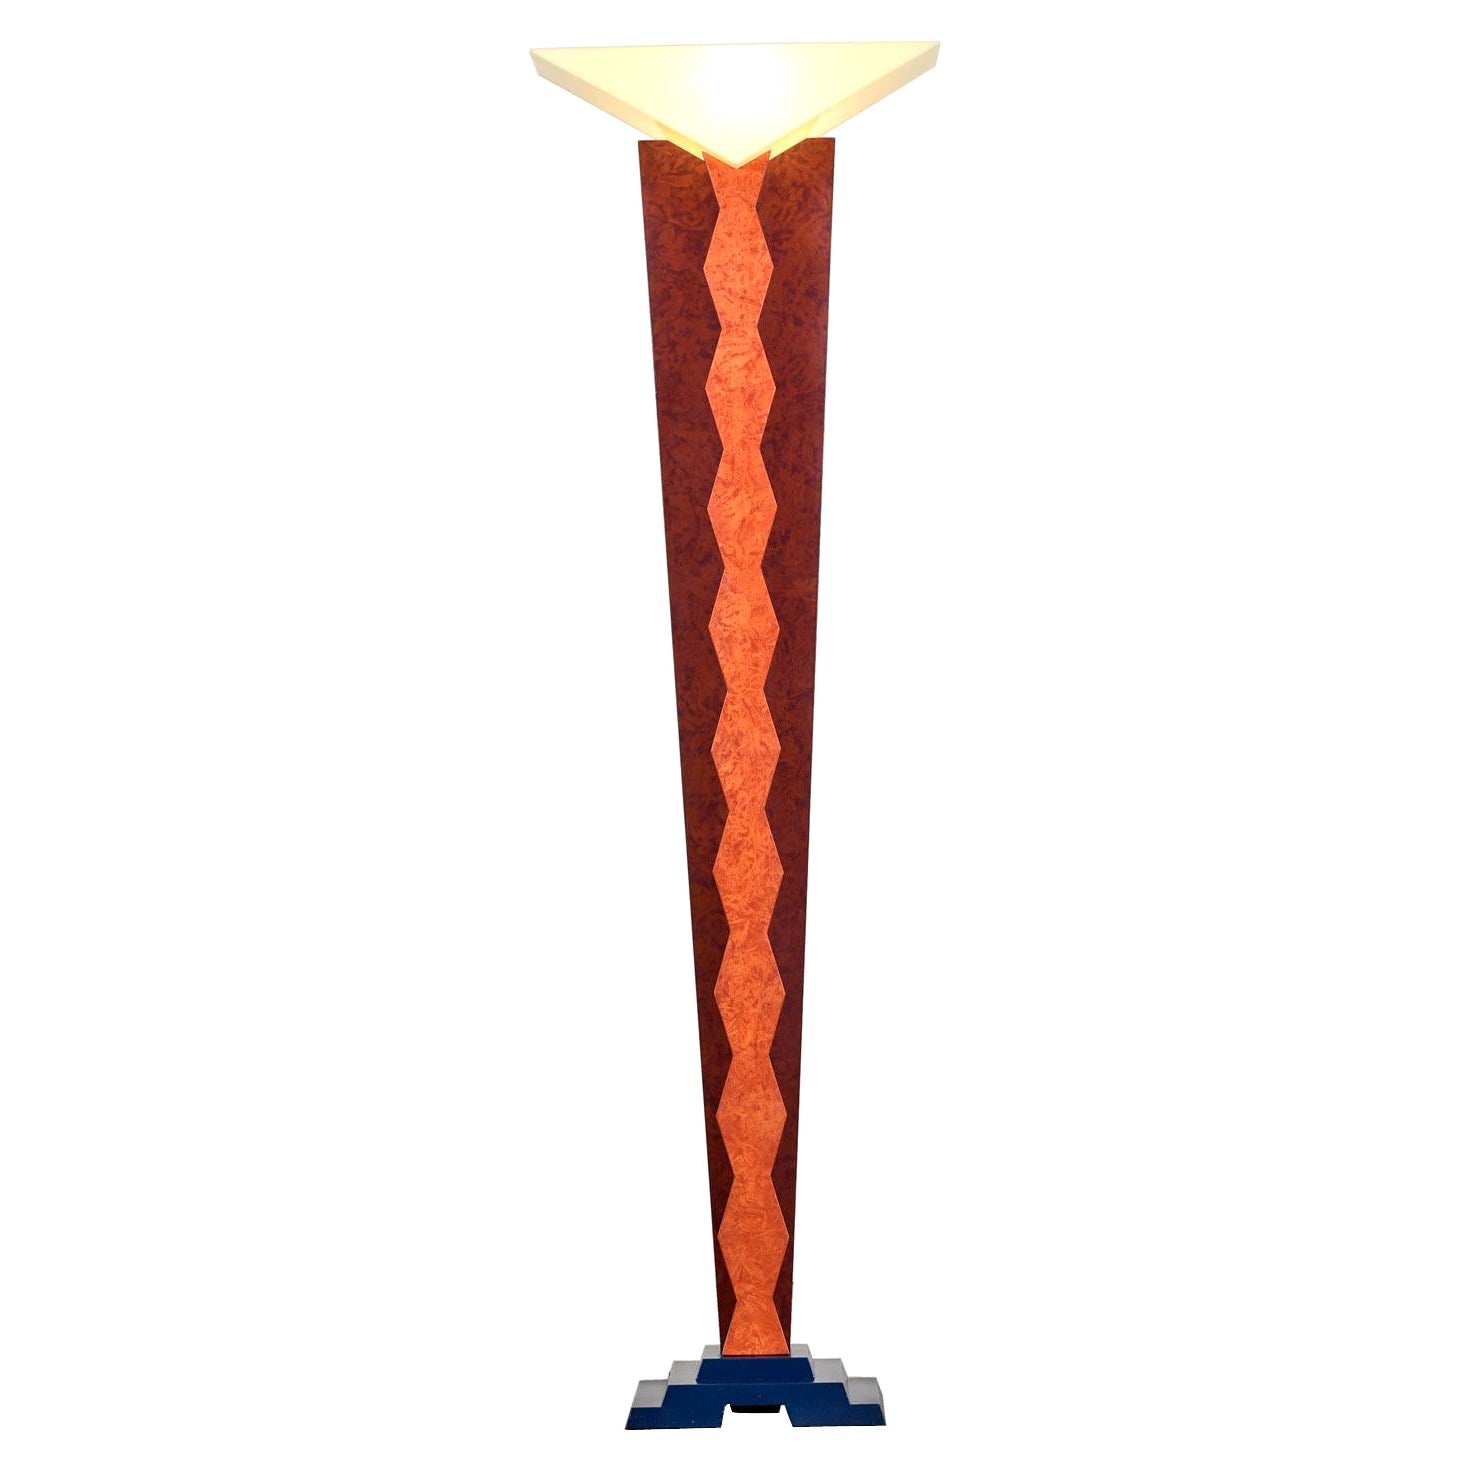 Sottsass Style Memphis Floor Lamp by Neophile Limited Edition Furniture 1988 For Sale